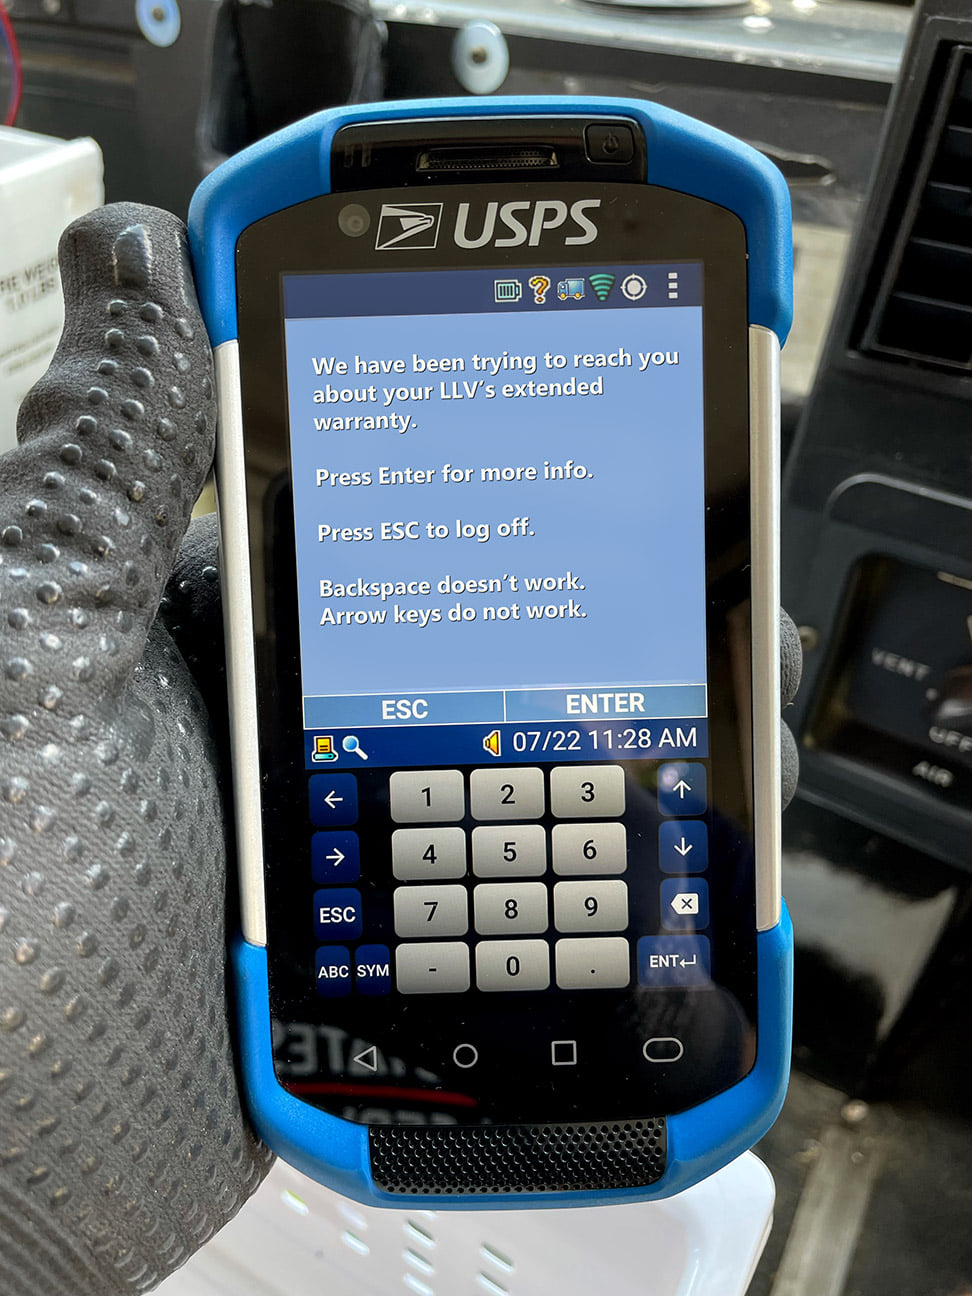 feature phone - Usps We have been trying to reach you about your Llv's extended warranty Press Enter for more info. Press Esc to log off. Backspace doesn't work. Arrow keys do not work. Esc 19 Enter 0722 1 2 3 1 1 1 4 5 6 Esc 7 8 9 x 0 Abc Sym Ent P3TO